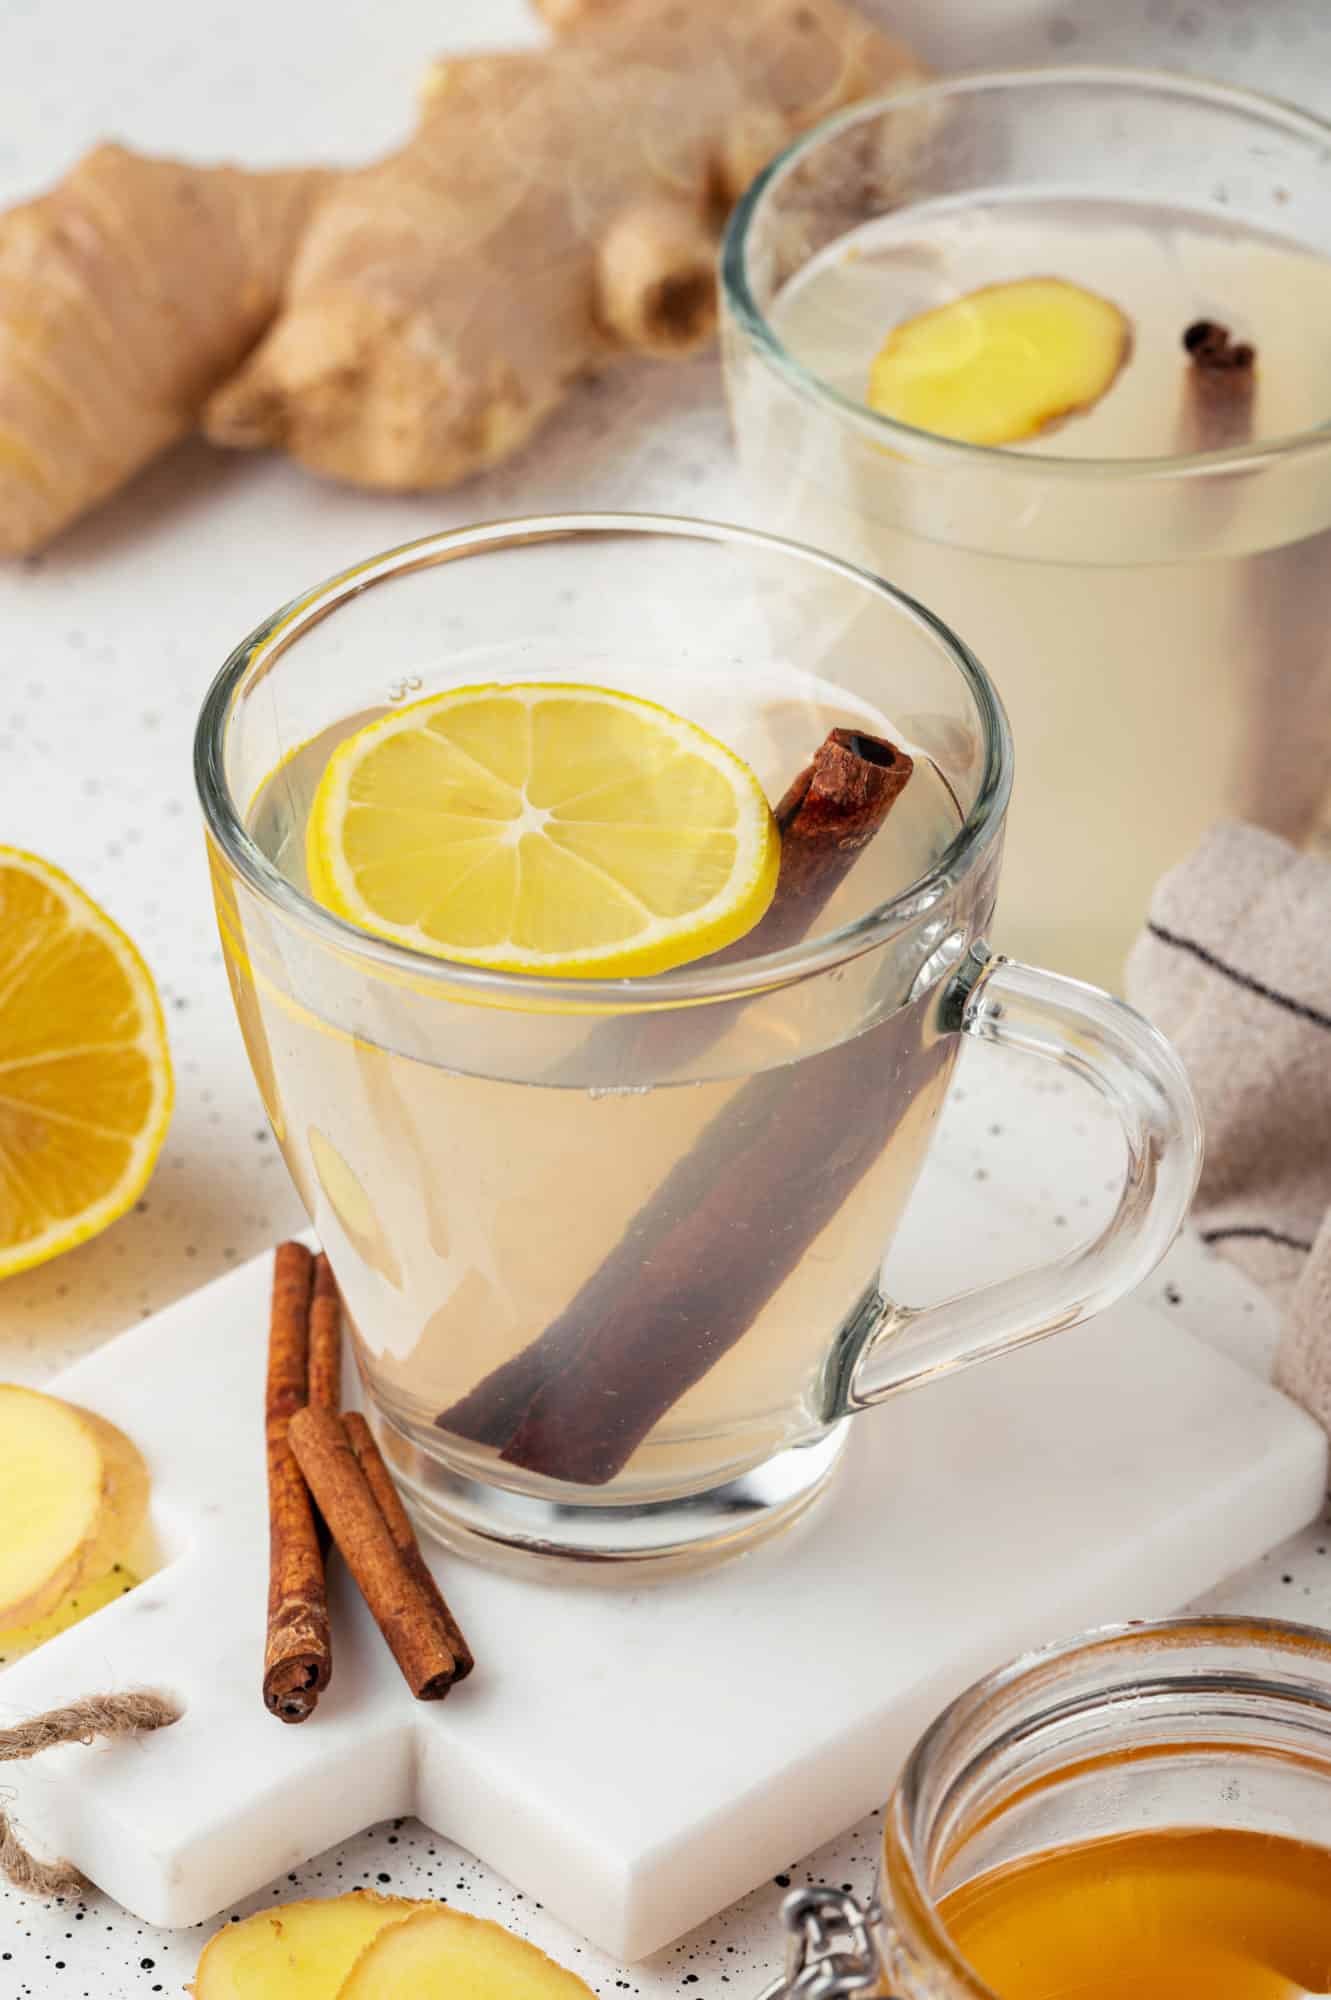 ginger-tea-in-glass-mugs-on-a-white-board-with-lemon-slices-and-cinnamon-sticks